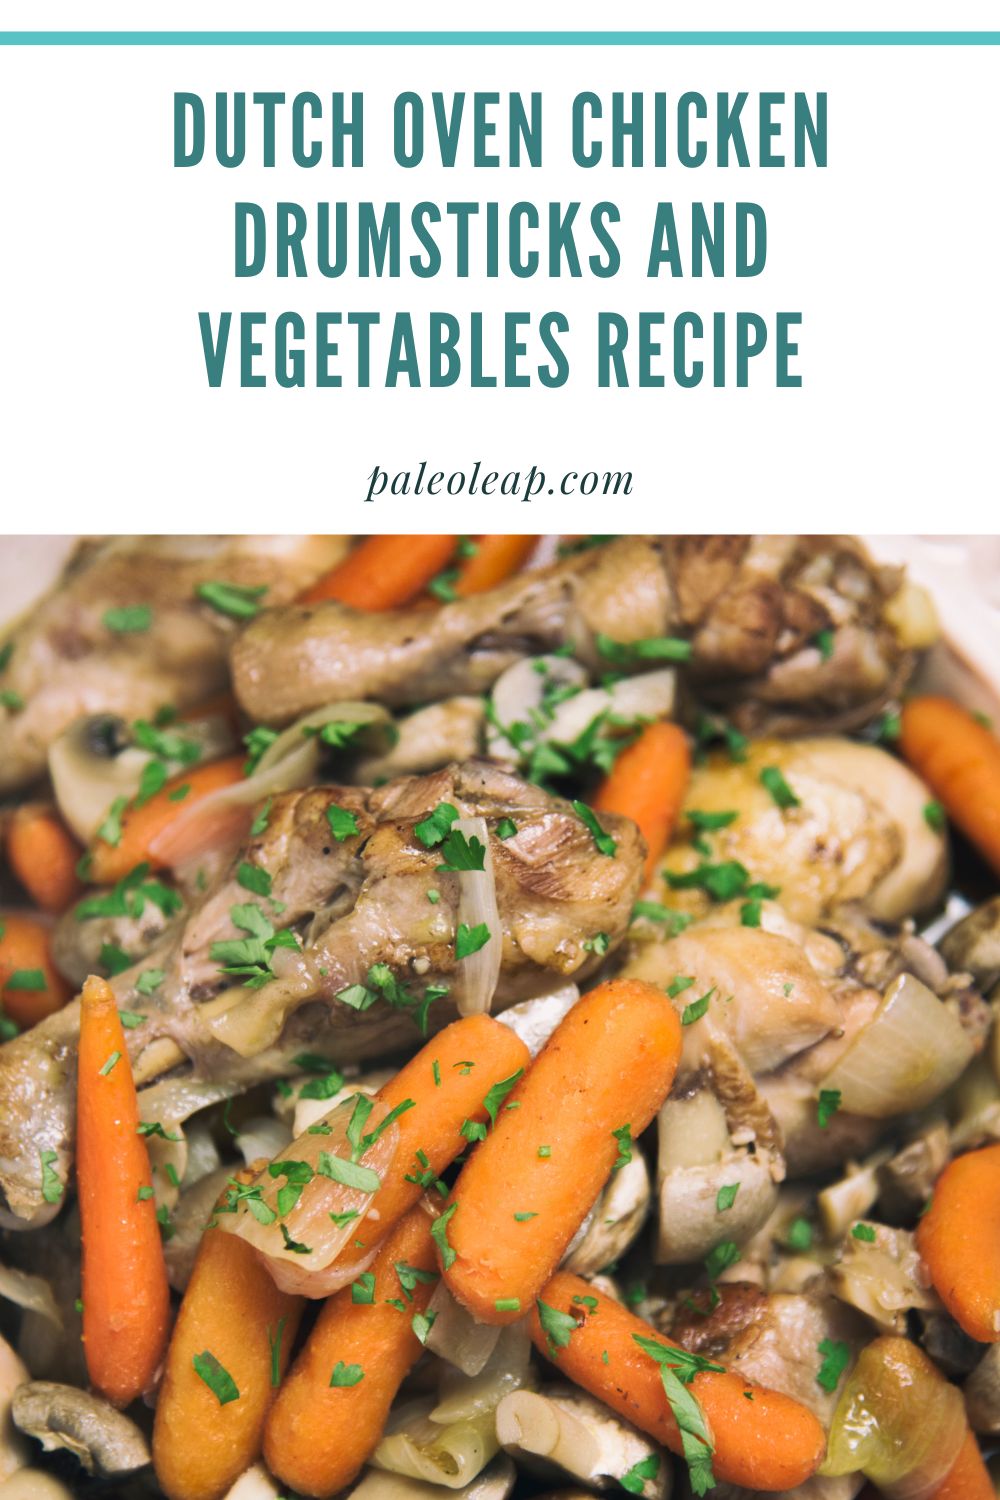 Dutch Oven Chicken Drumsticks and Vegetables Recipe | Paleo Leap